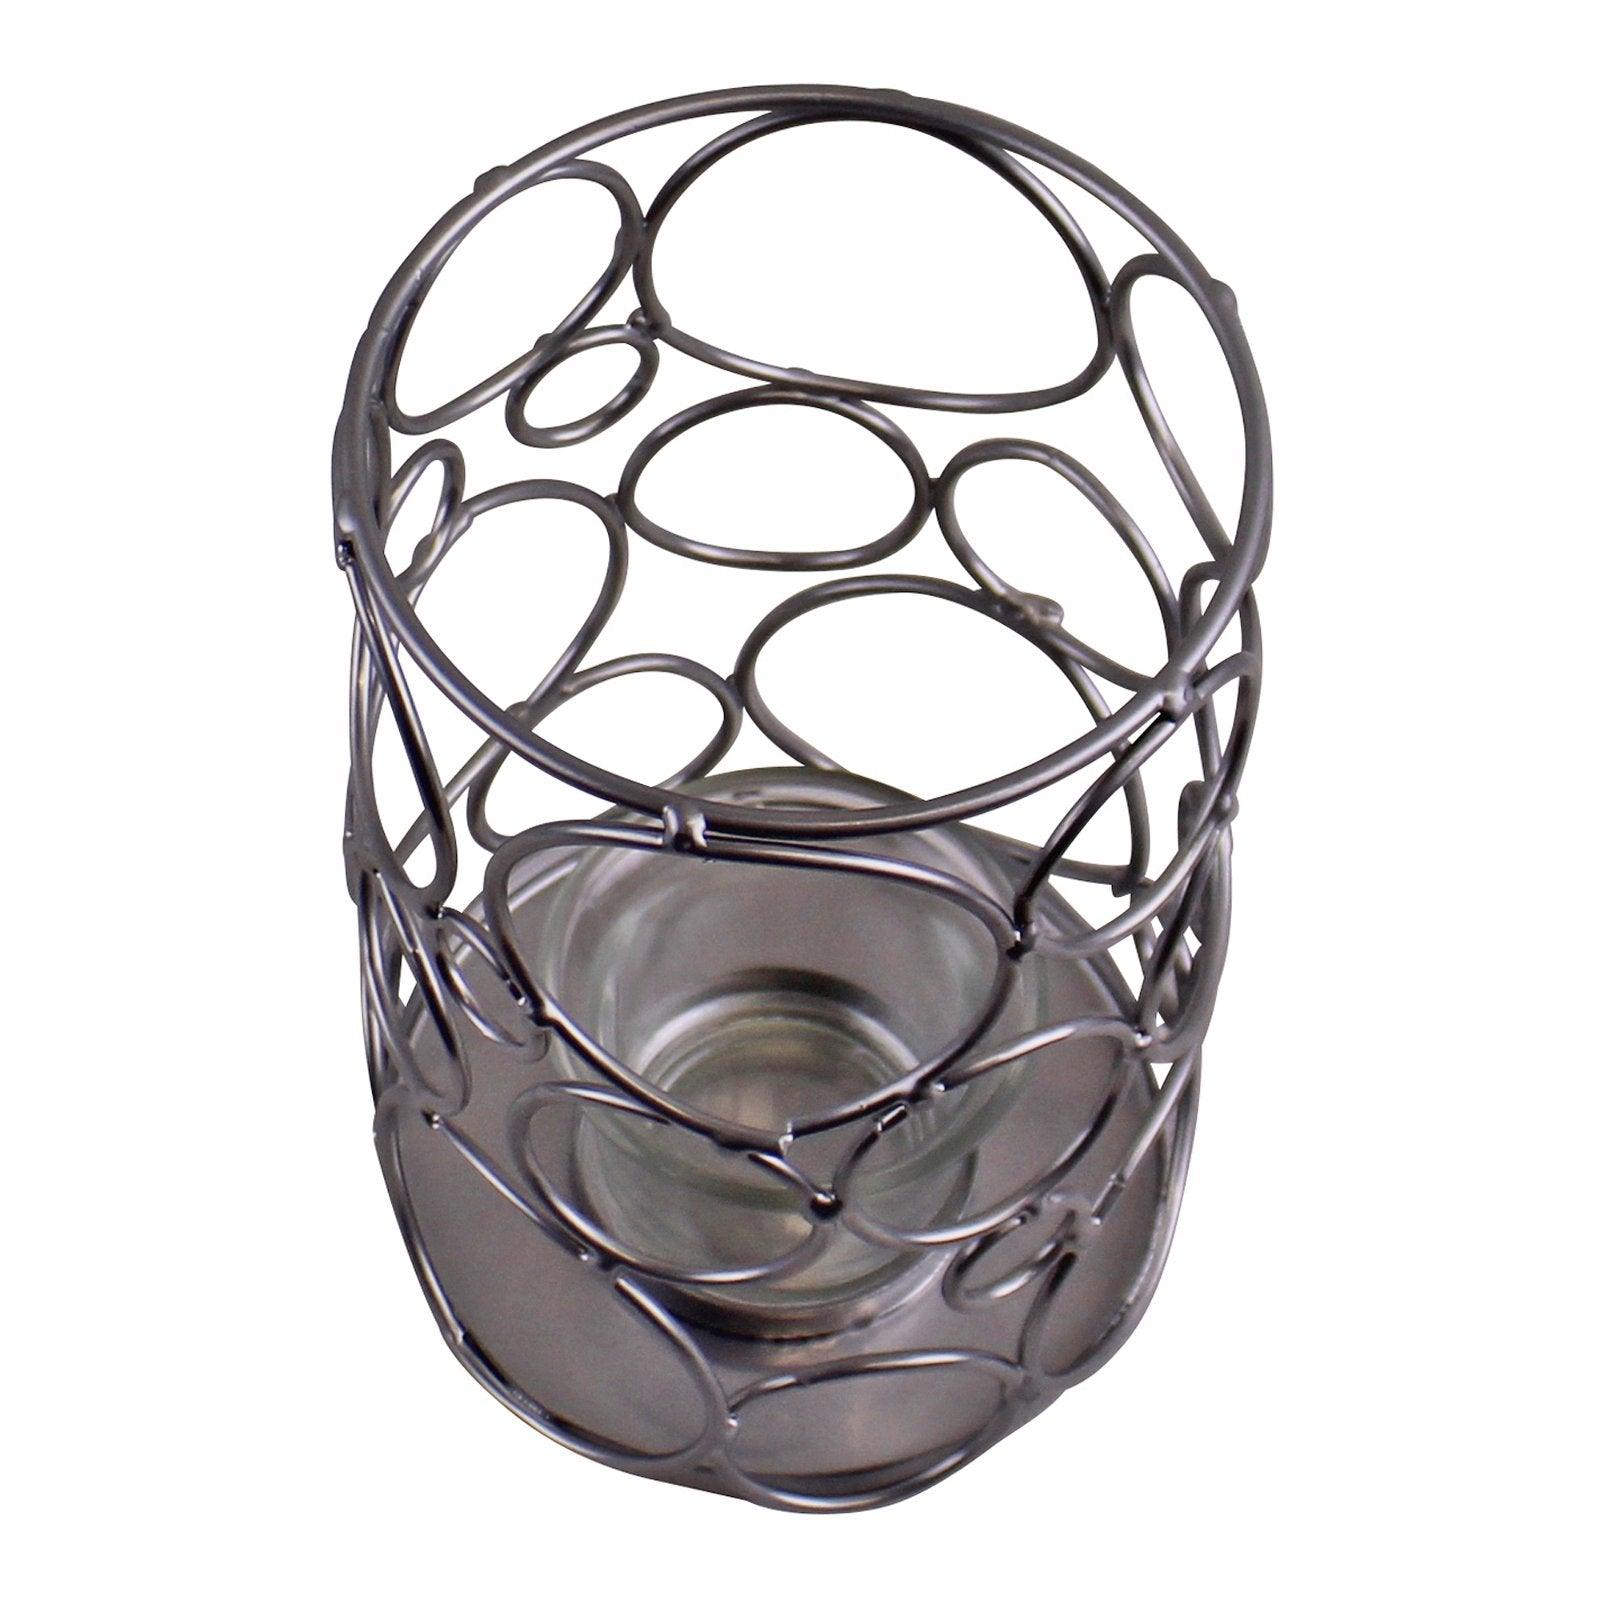 View Small Silver Metal Abstract Design Candle Holder information